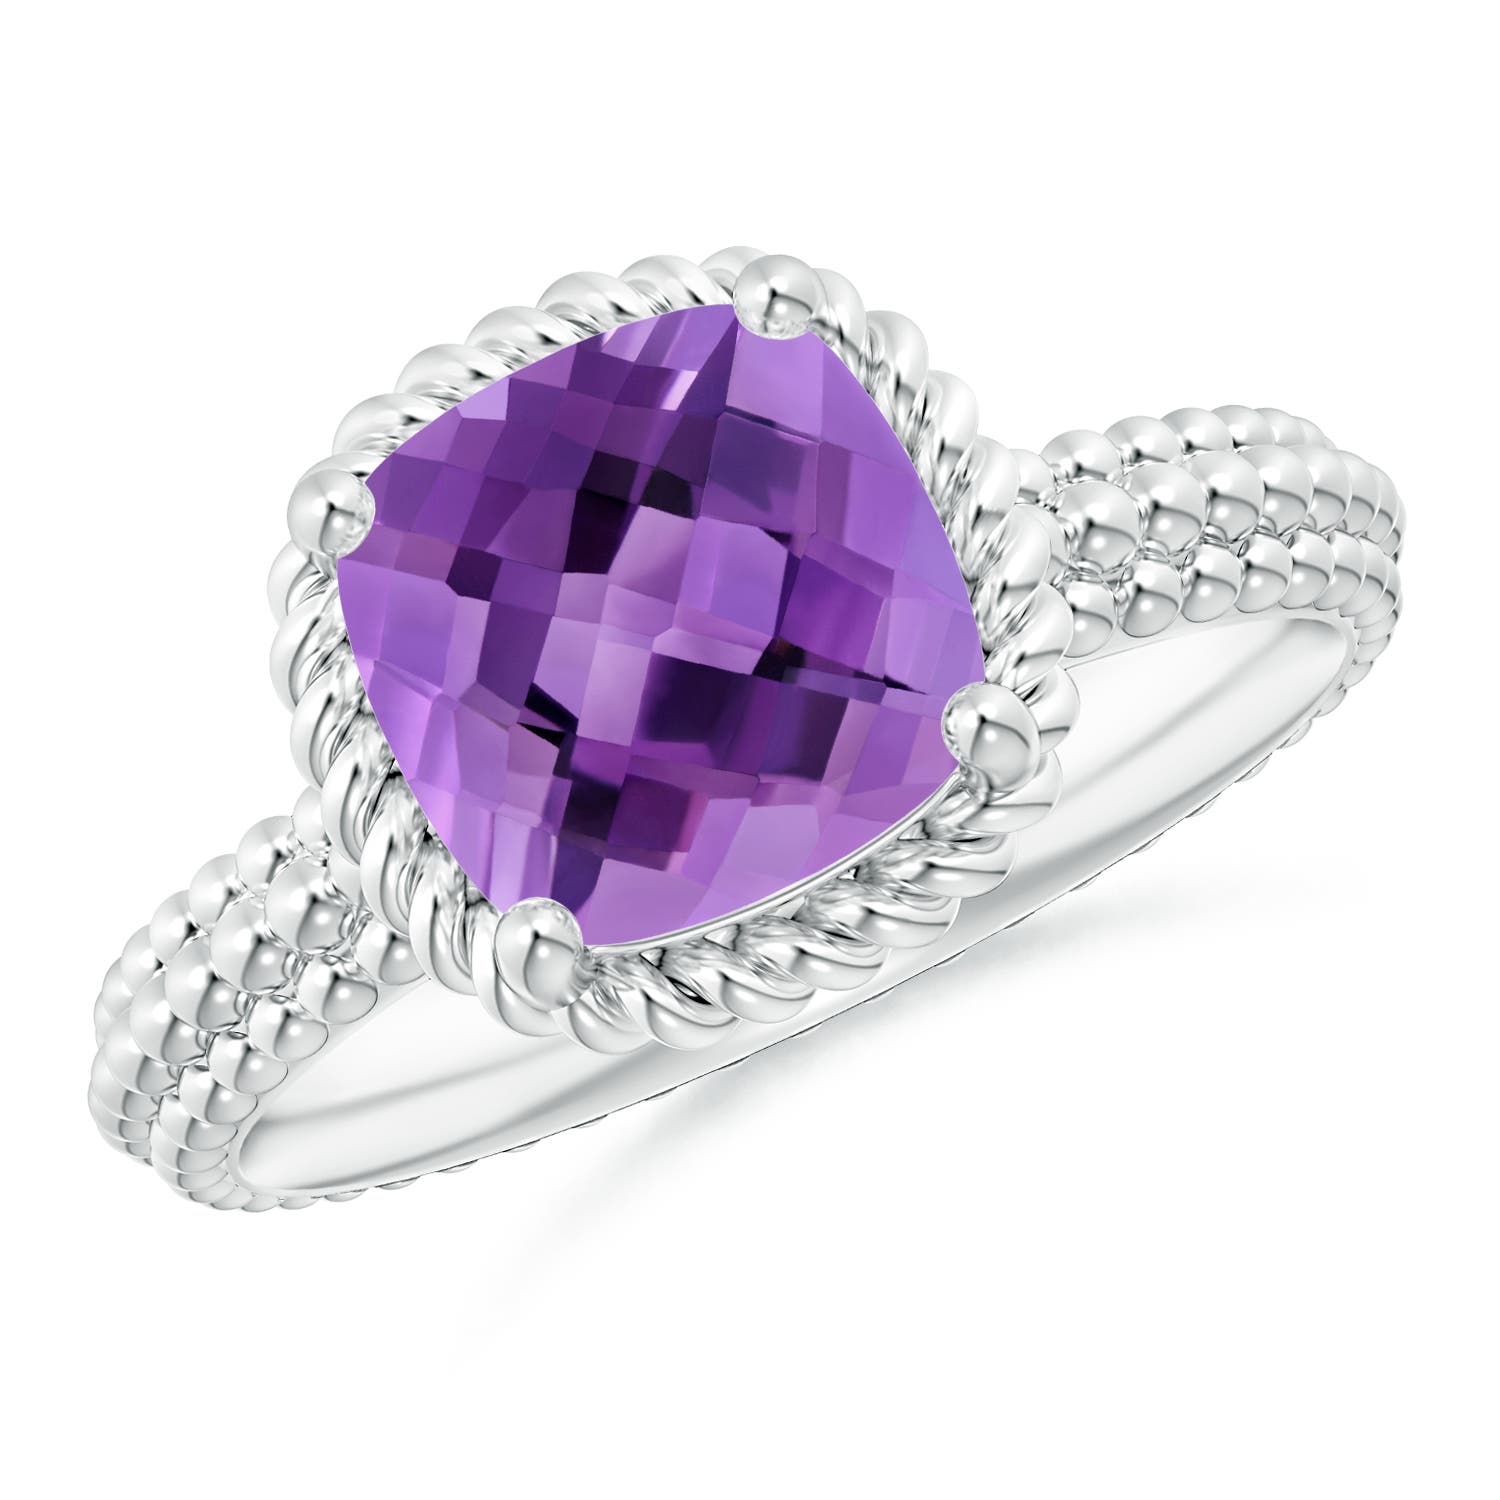 AA - Amethyst / 2.2 CT / 14 KT White Gold